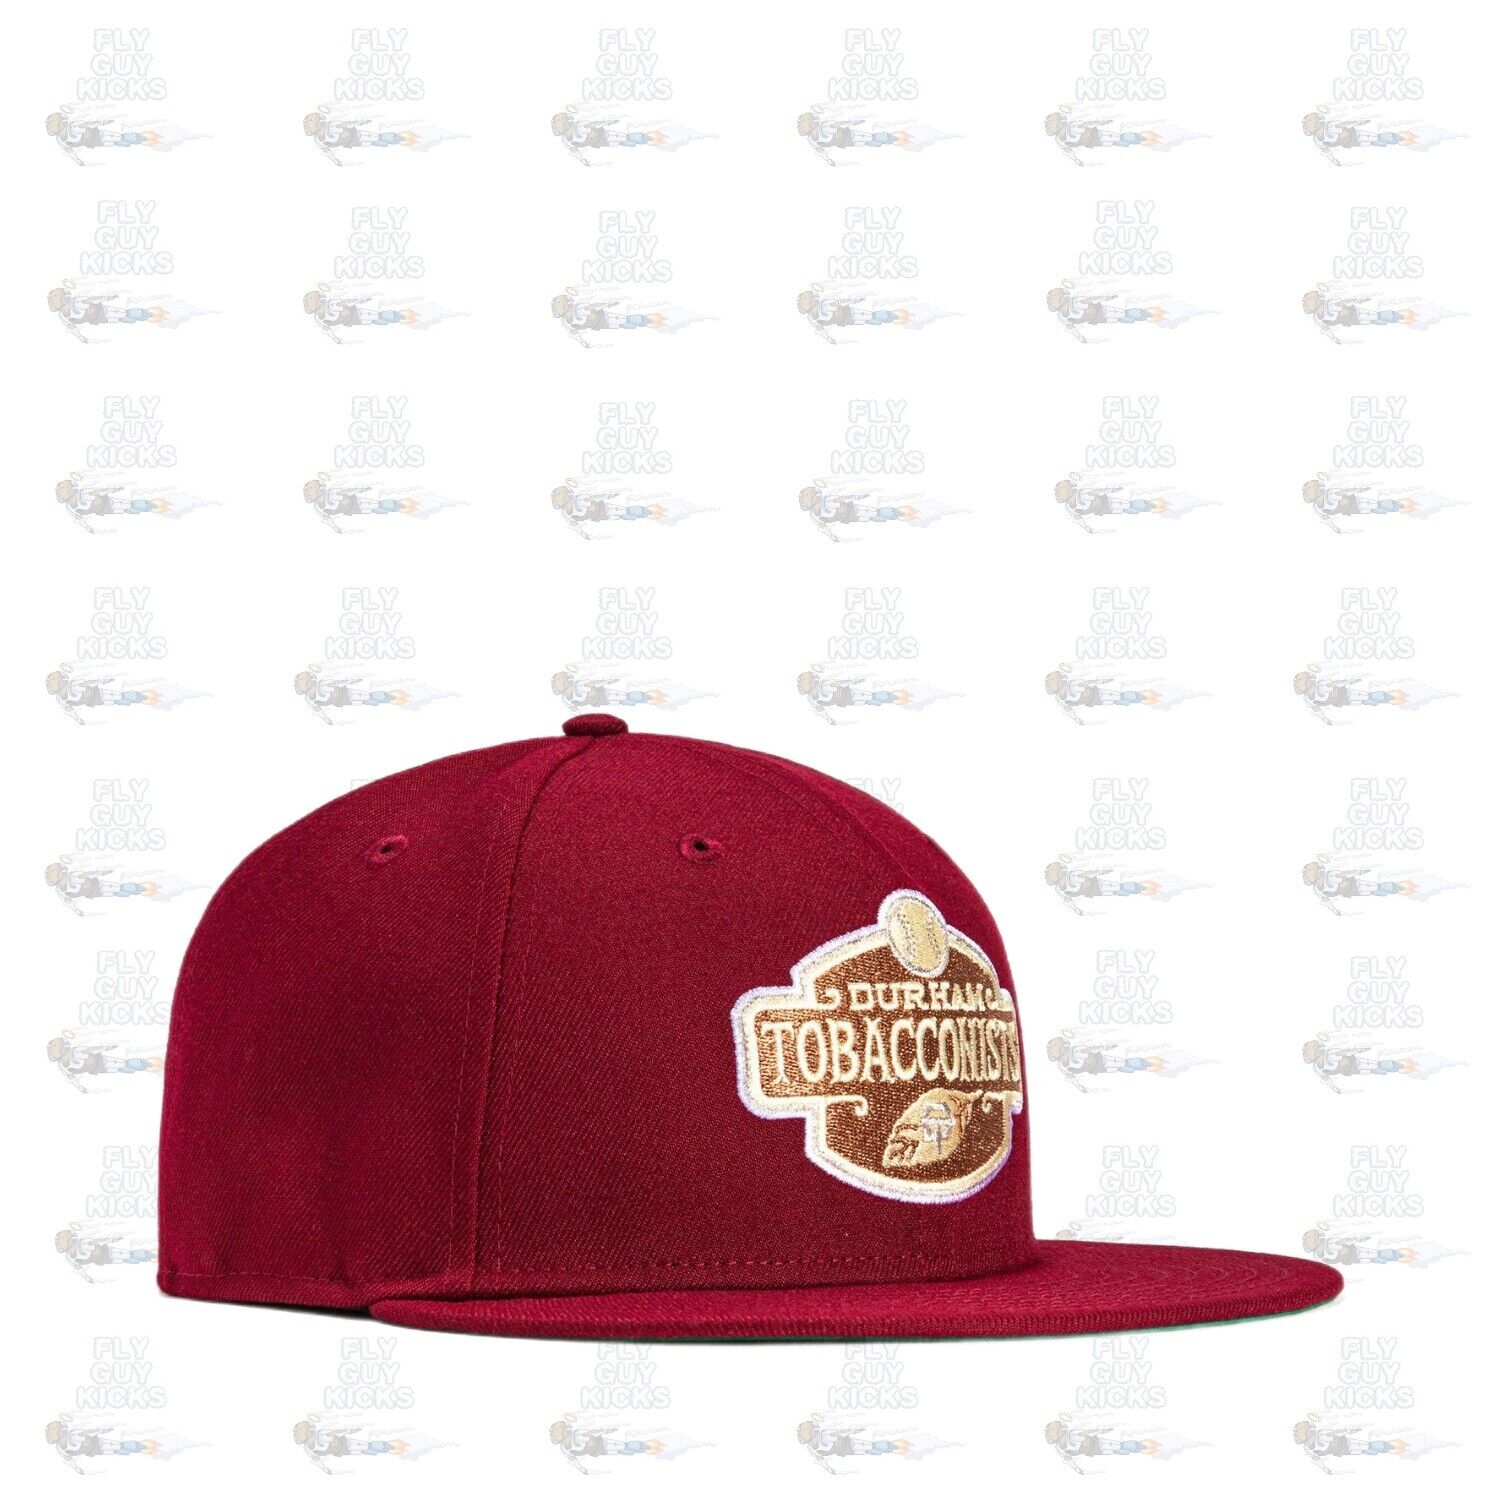 New Era Durham Bulls Tobaccanoists Cardinal Red 59Fifty 5950 Patch Fitted Hat